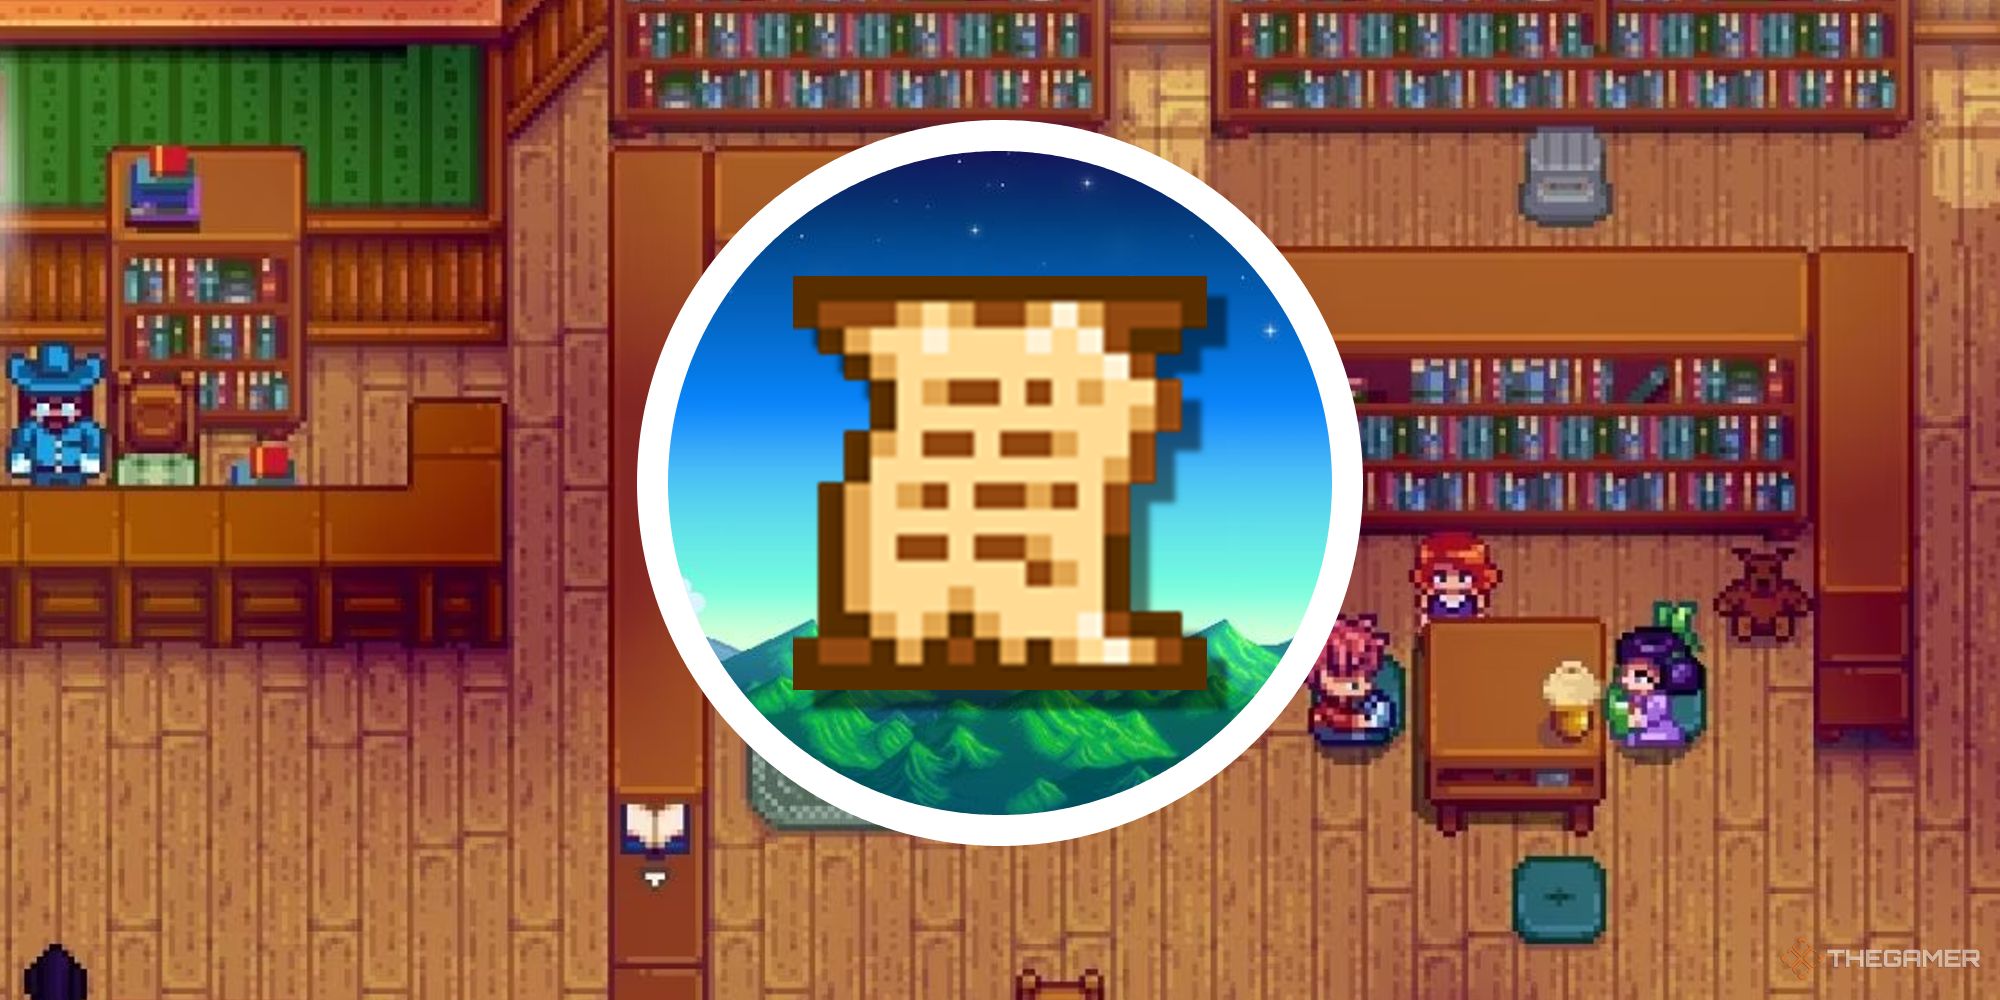 stardew valley secret note guide featured image showing png of note over library